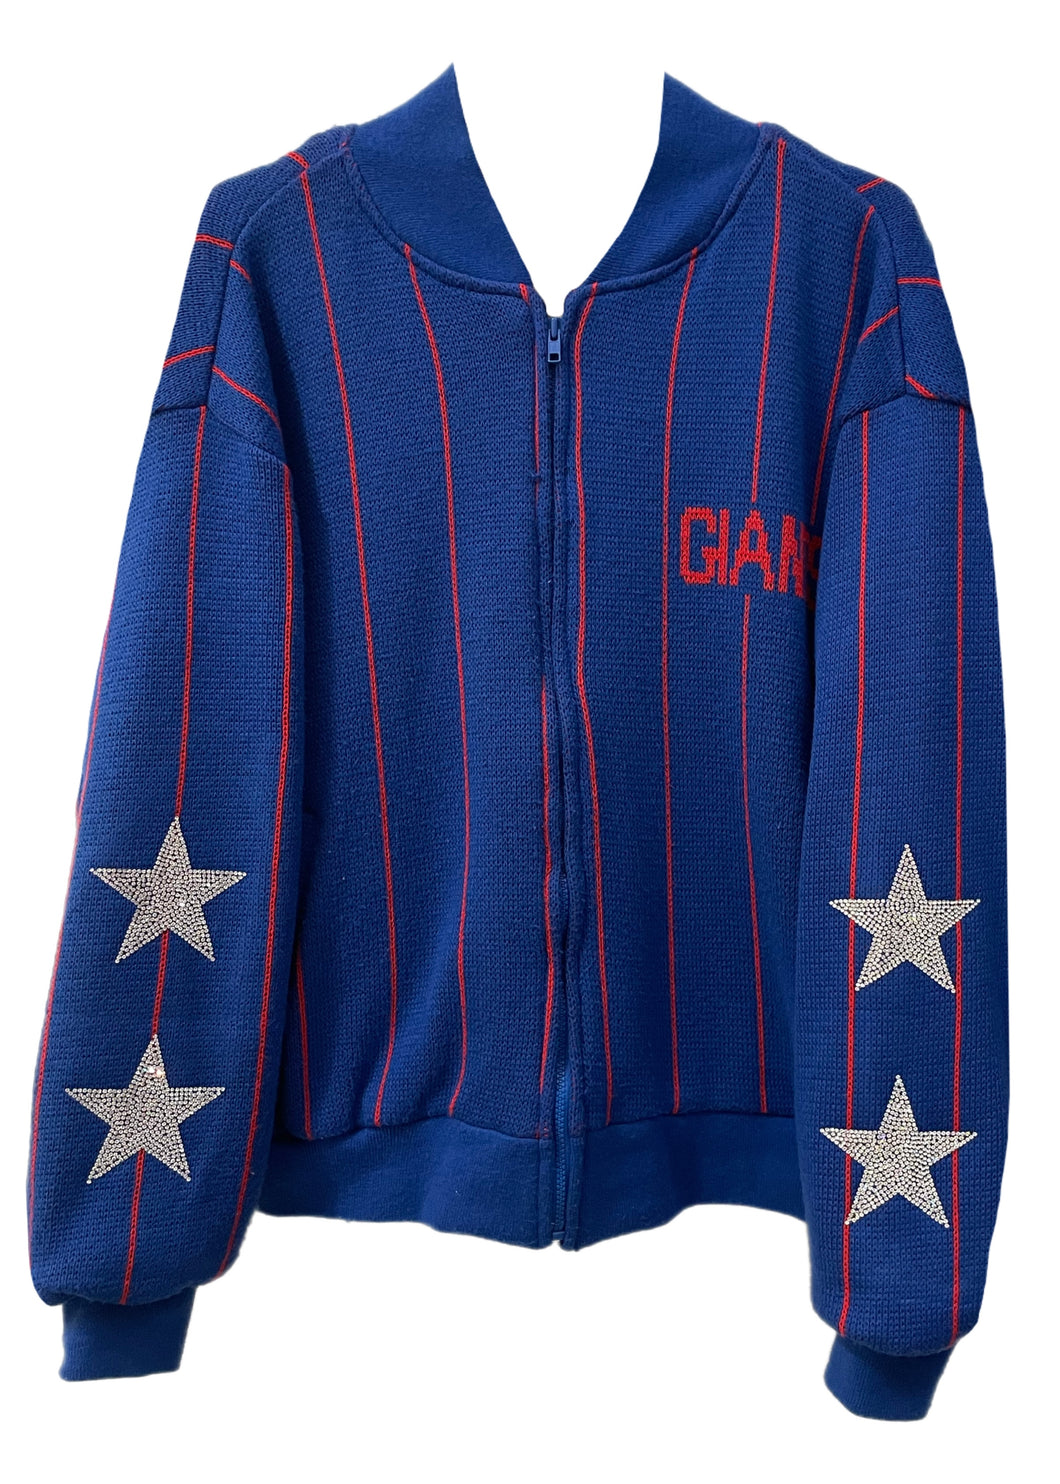 NY Giants, Football One of a KIND Vintage Knit Jacket with Crystal Star Design